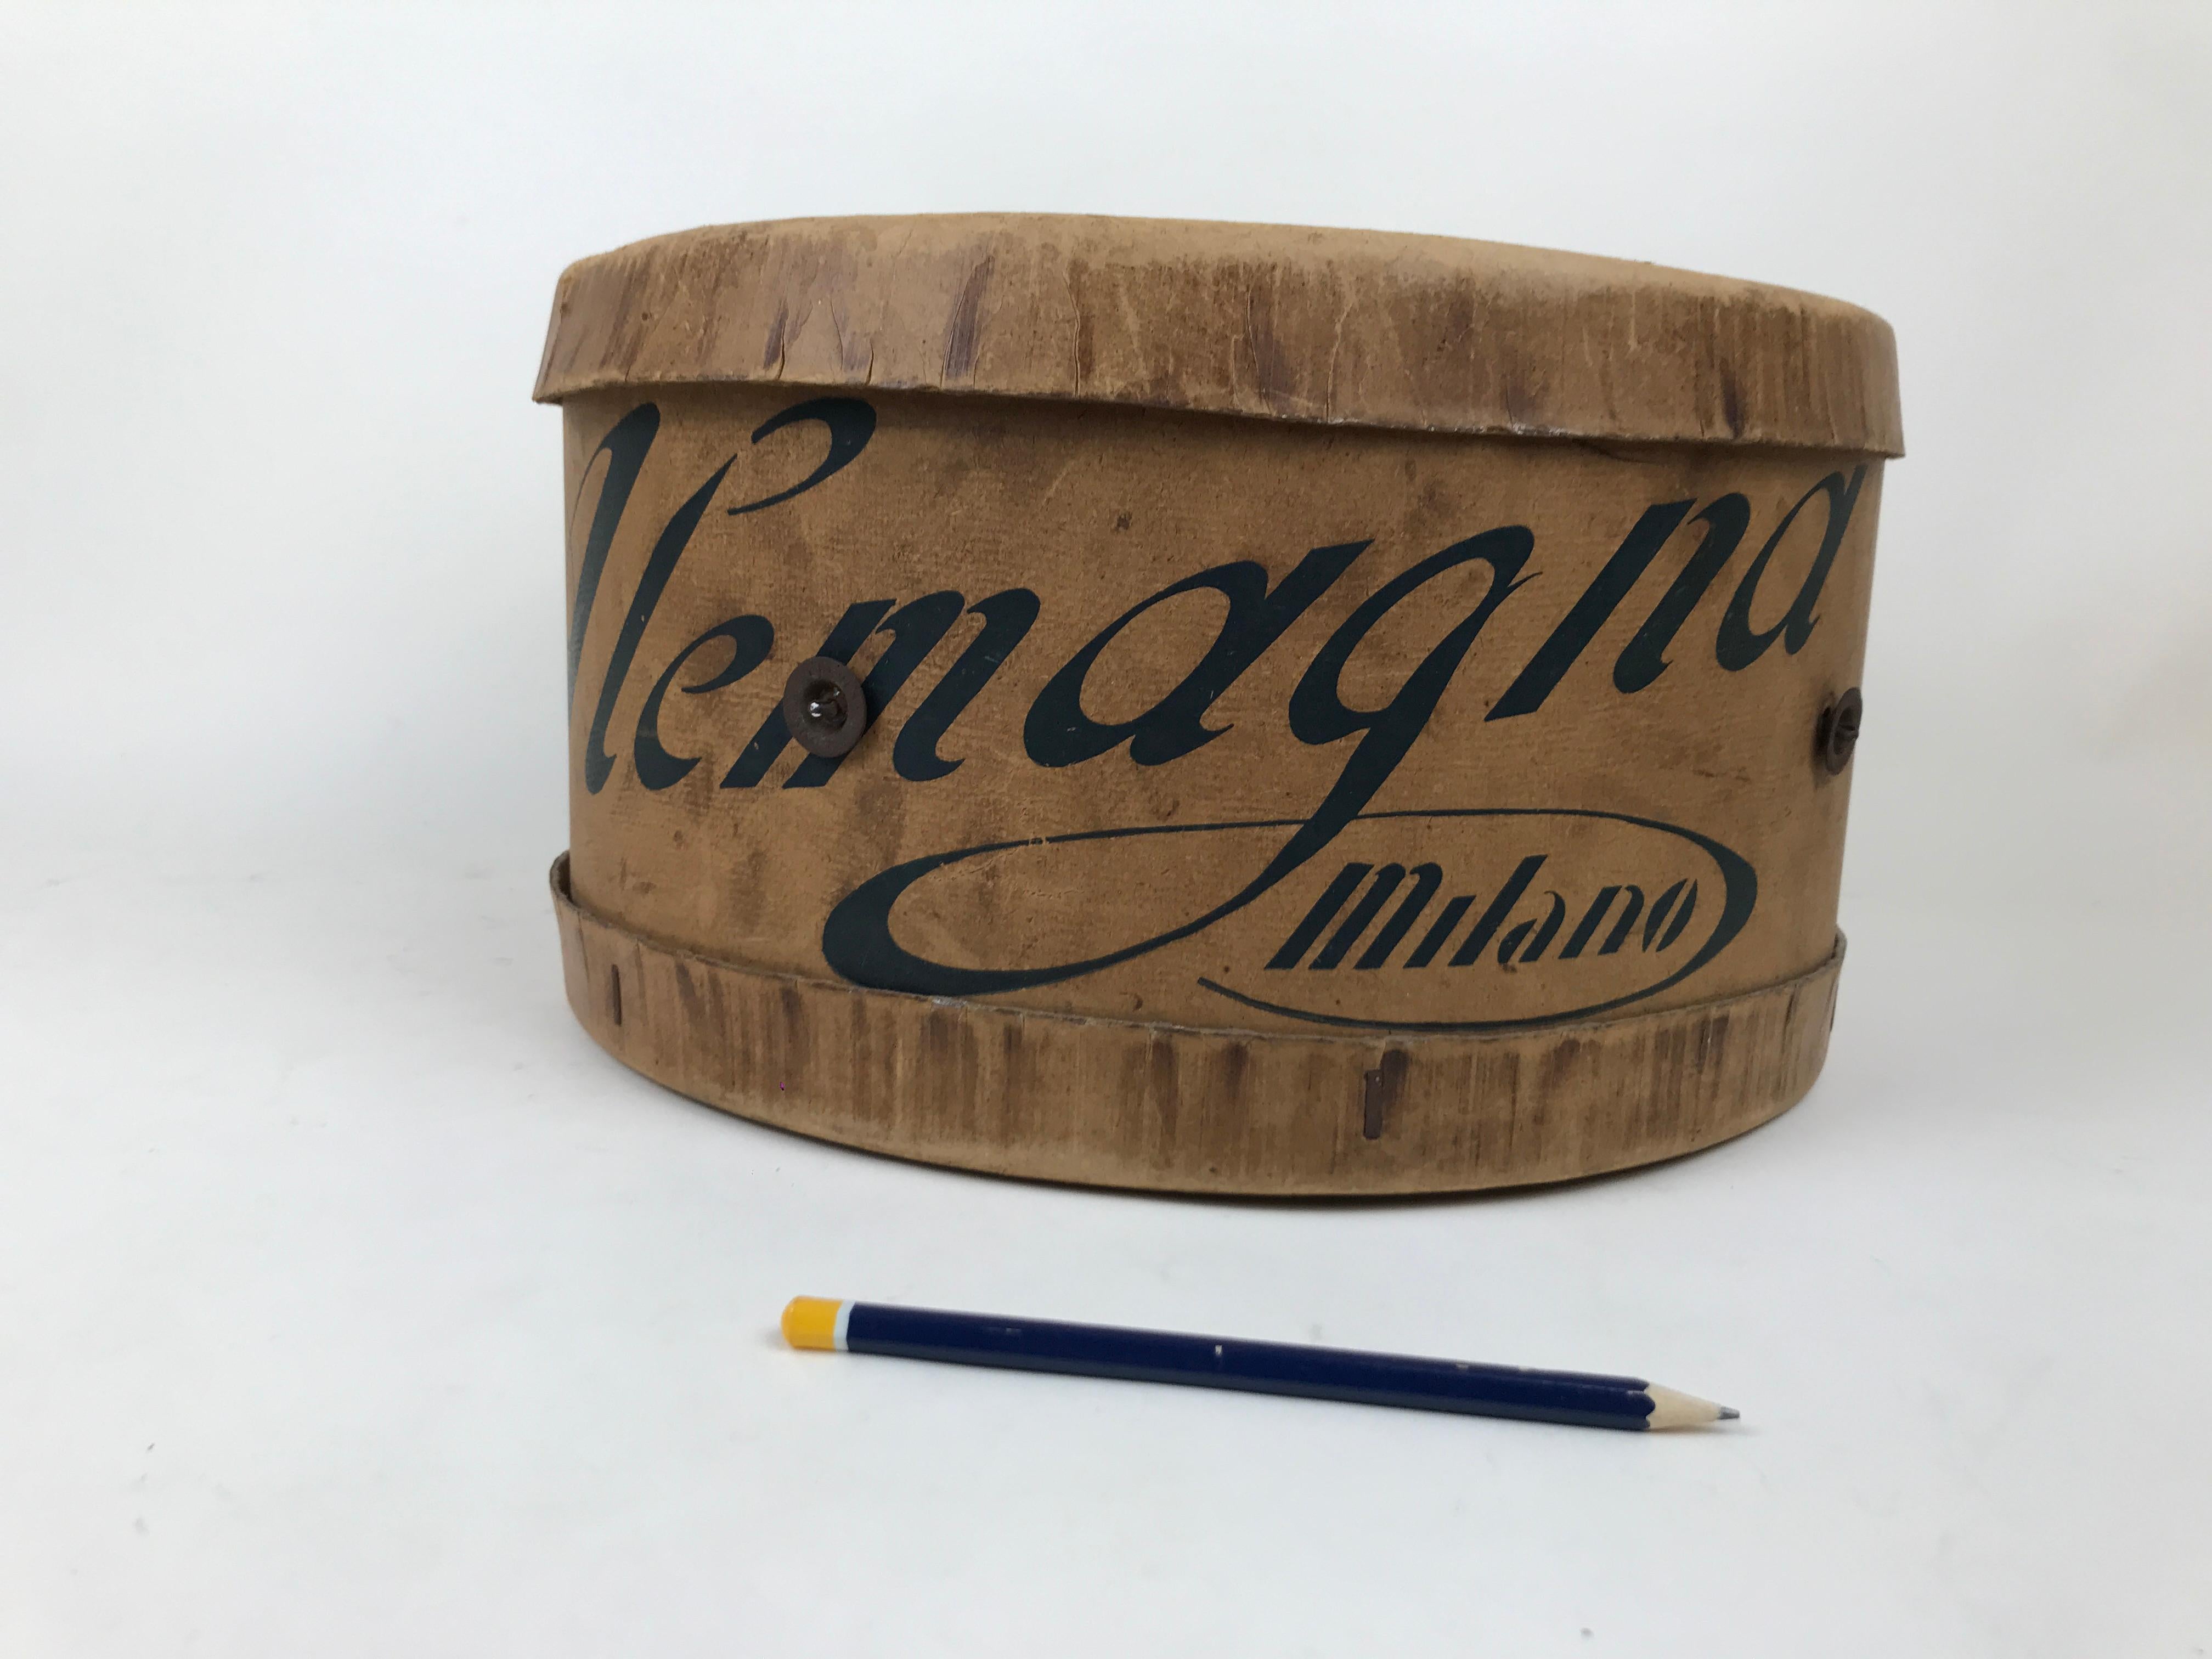 Italian vintage original cardboard box made in the 1950s by Italian famous cake company Alemagna.

The box - in the shape of hatbox - is missing its original string but is rich in patina with few lines of vernacular poetry and the original label